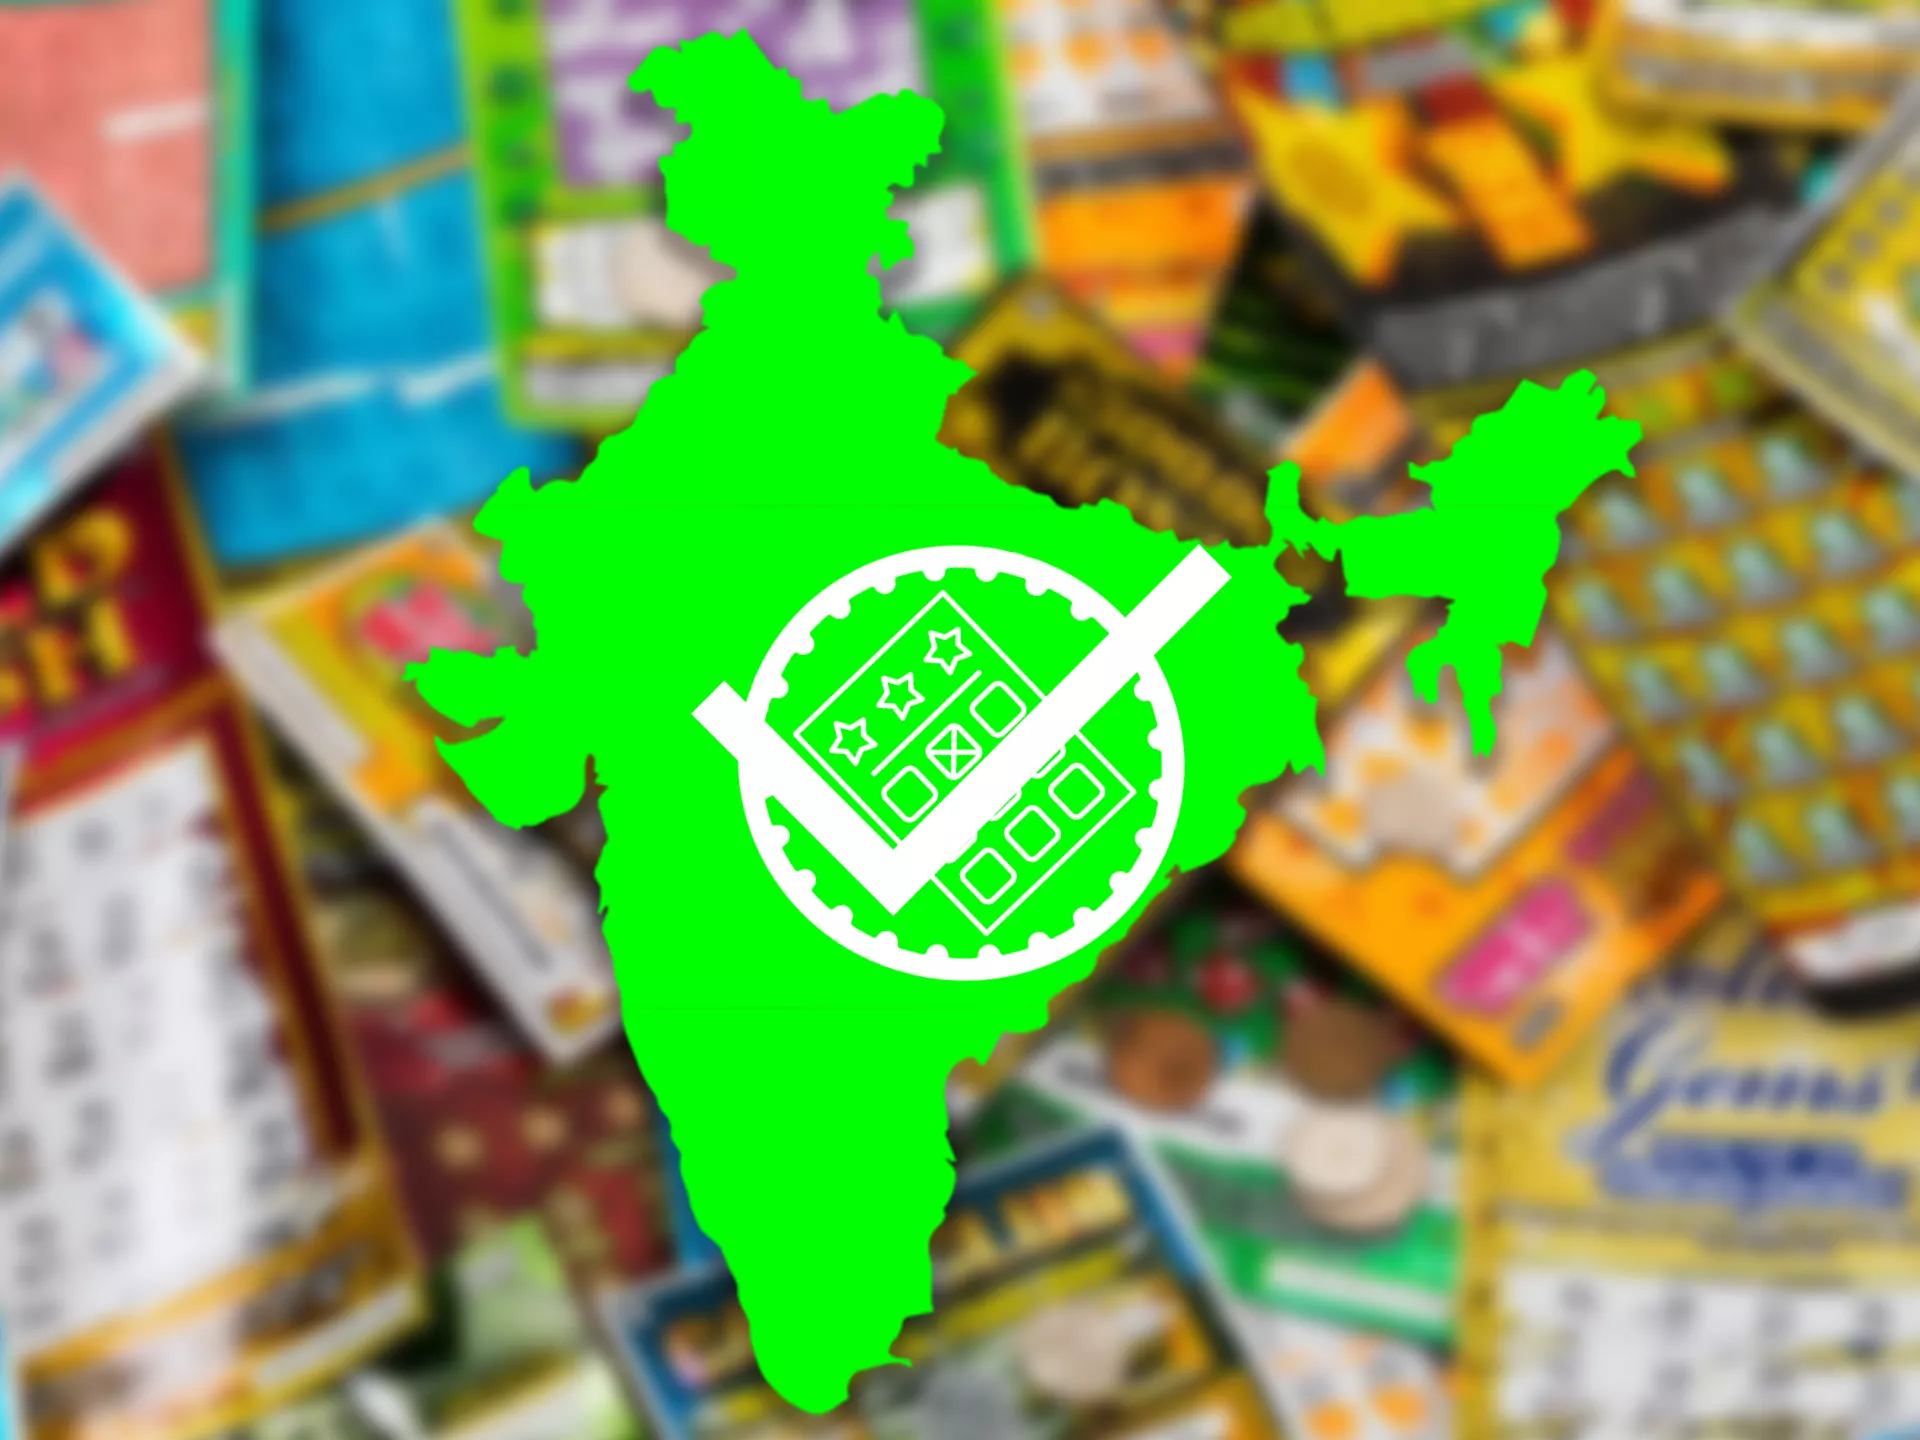 In 13 states of India lotteries are completely legal.